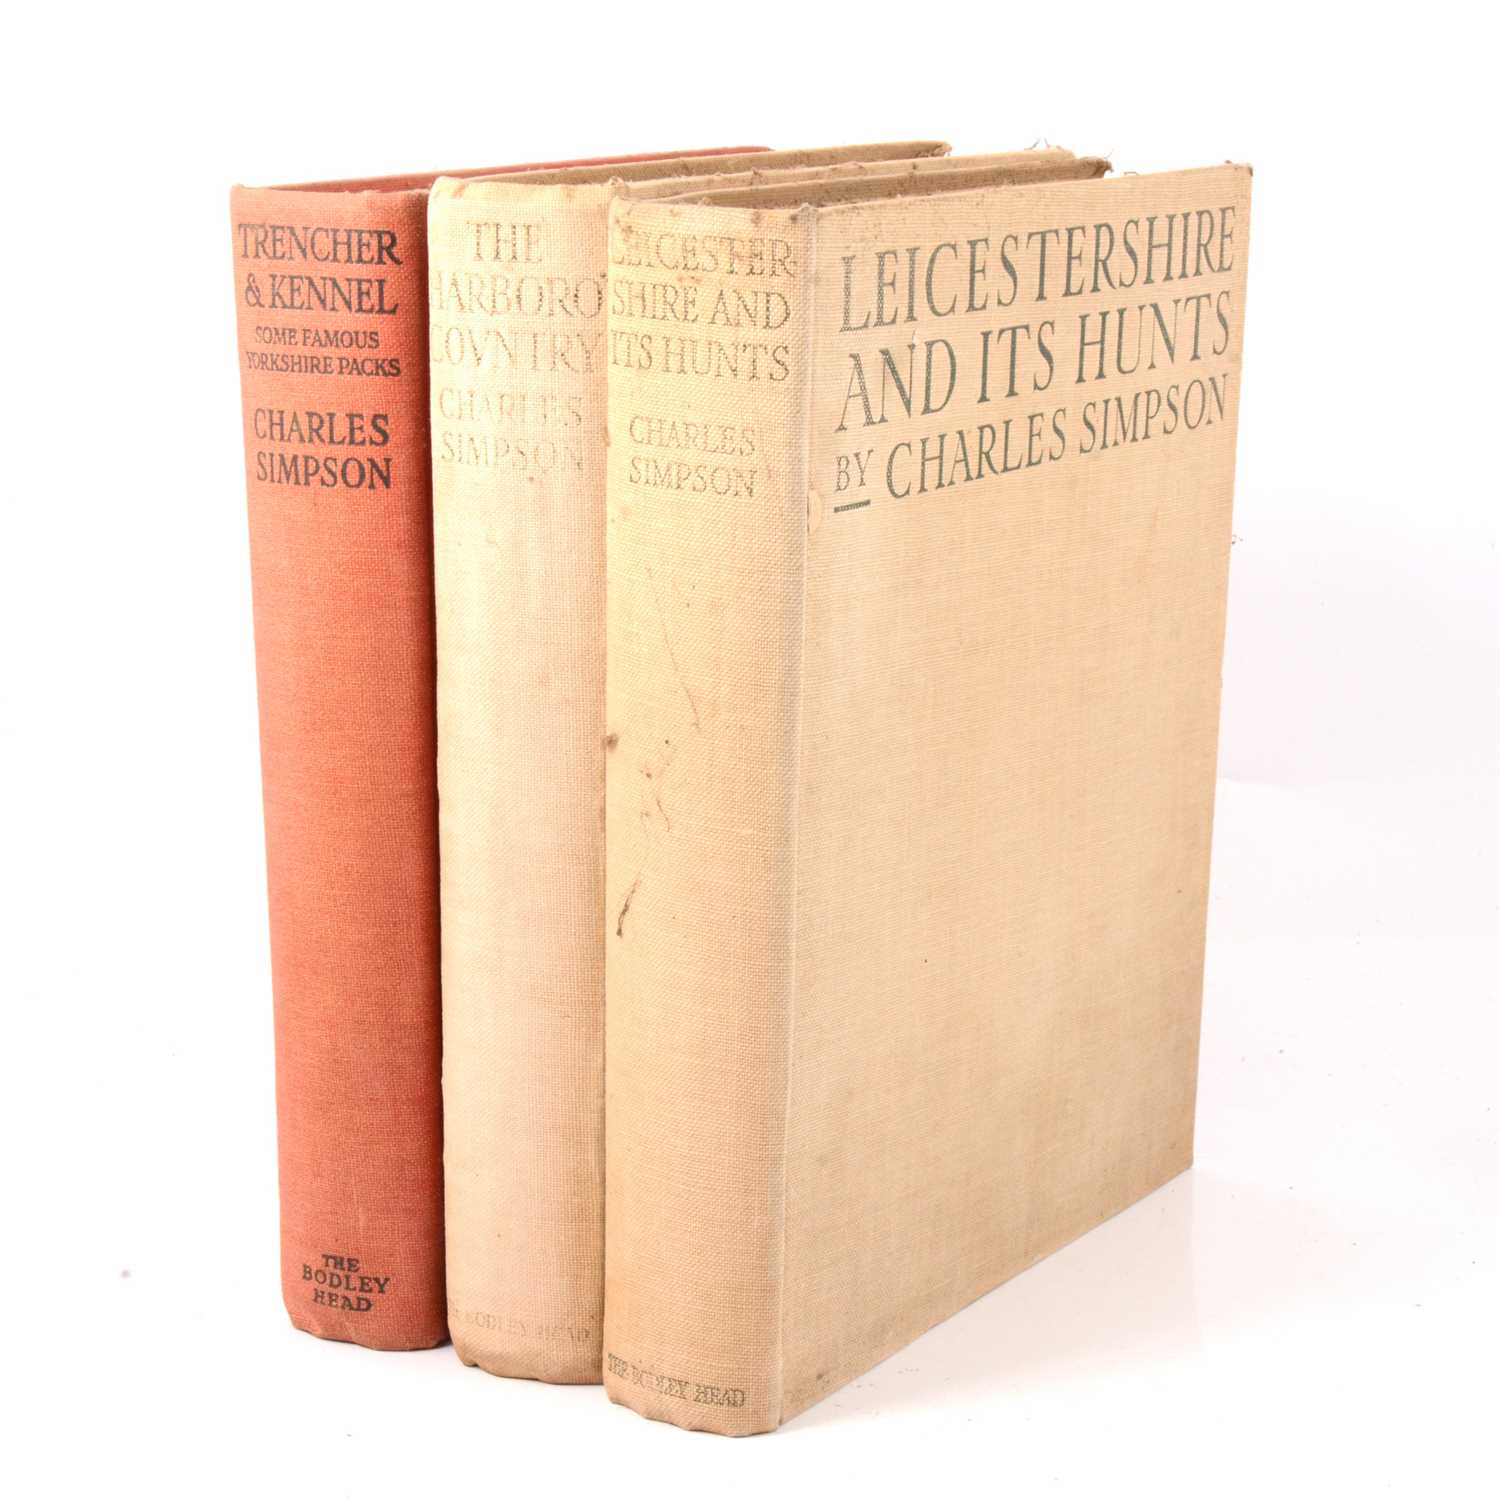 Lot 115 - Charles Simpson, Leicestershire and Its Hunts